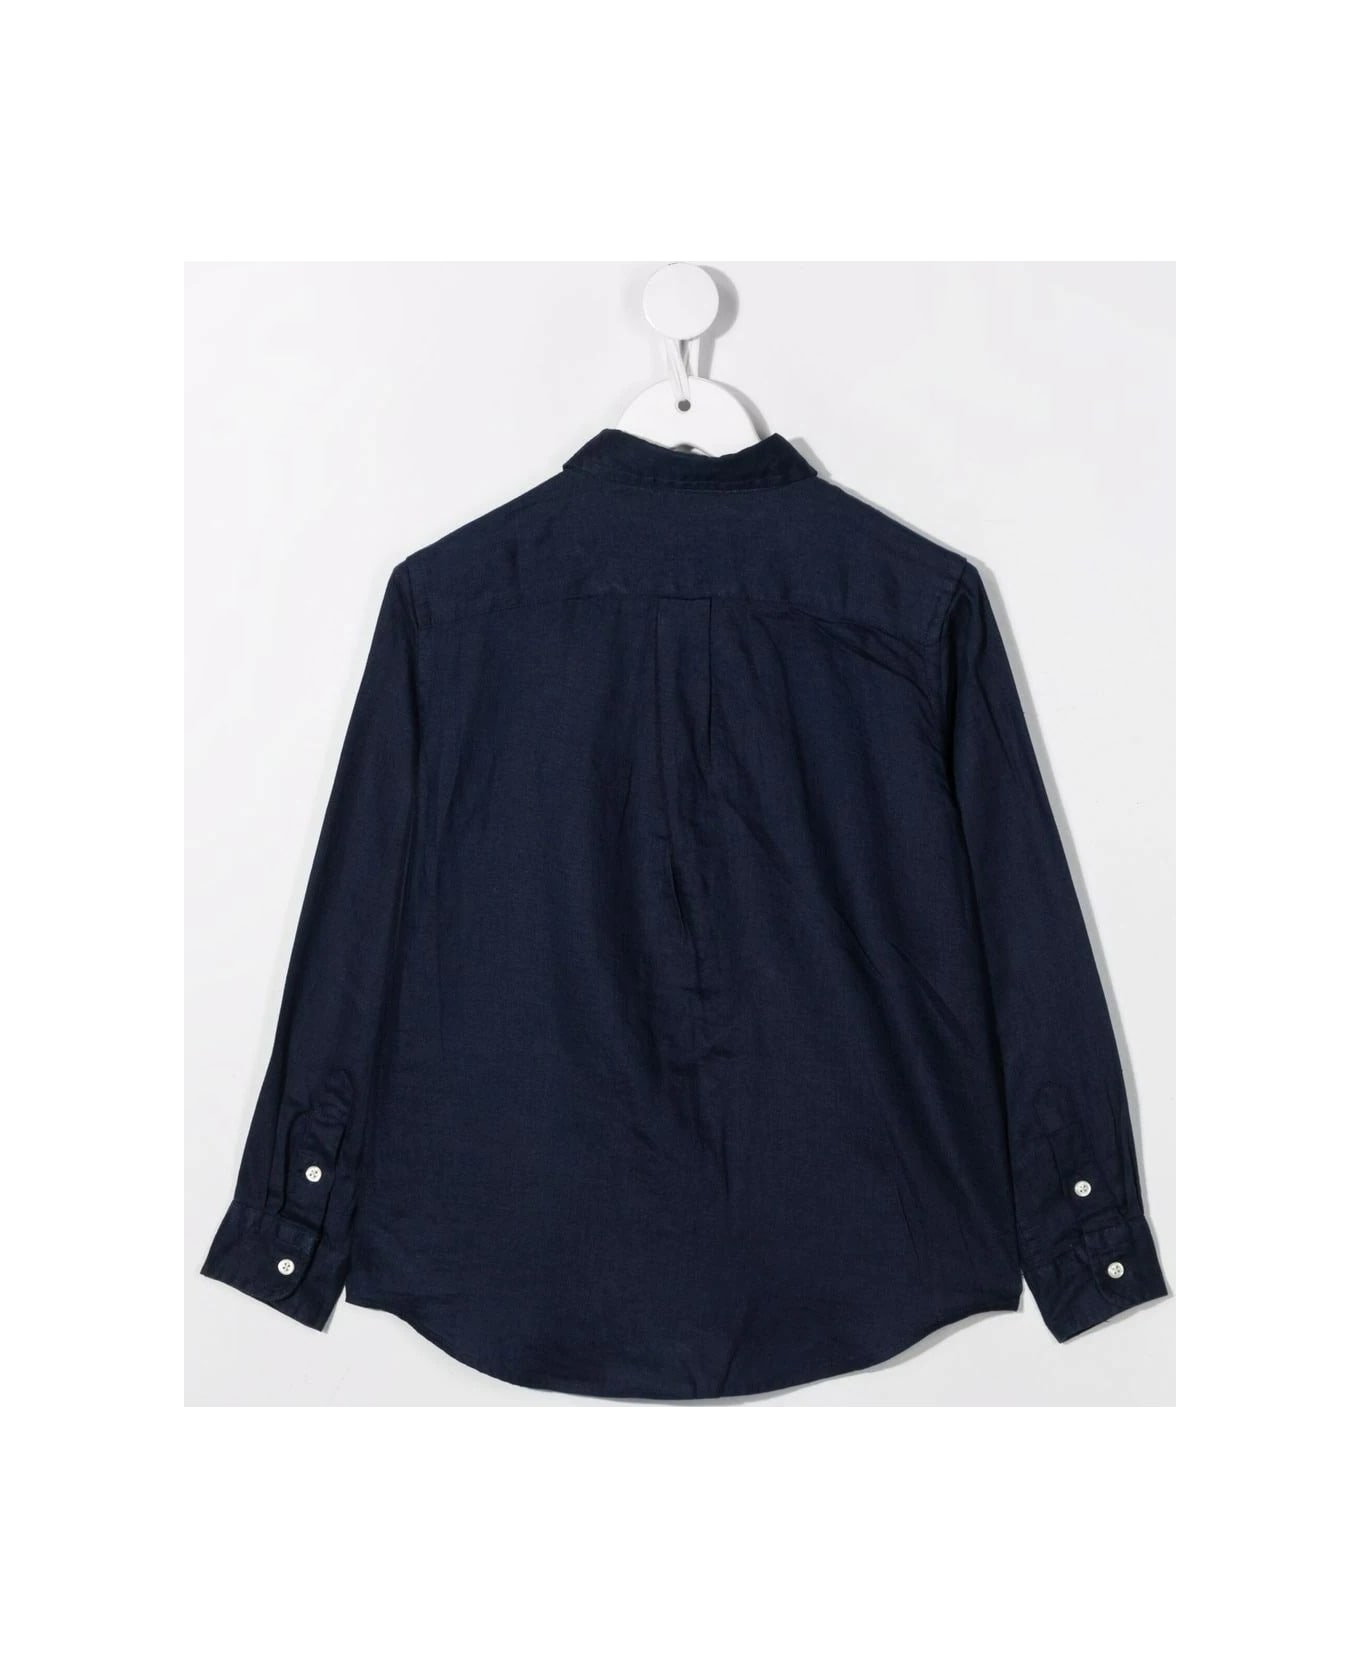 Polo Ralph Lauren Navy Blue Linen Shirt With Embroidered Pony シャツ